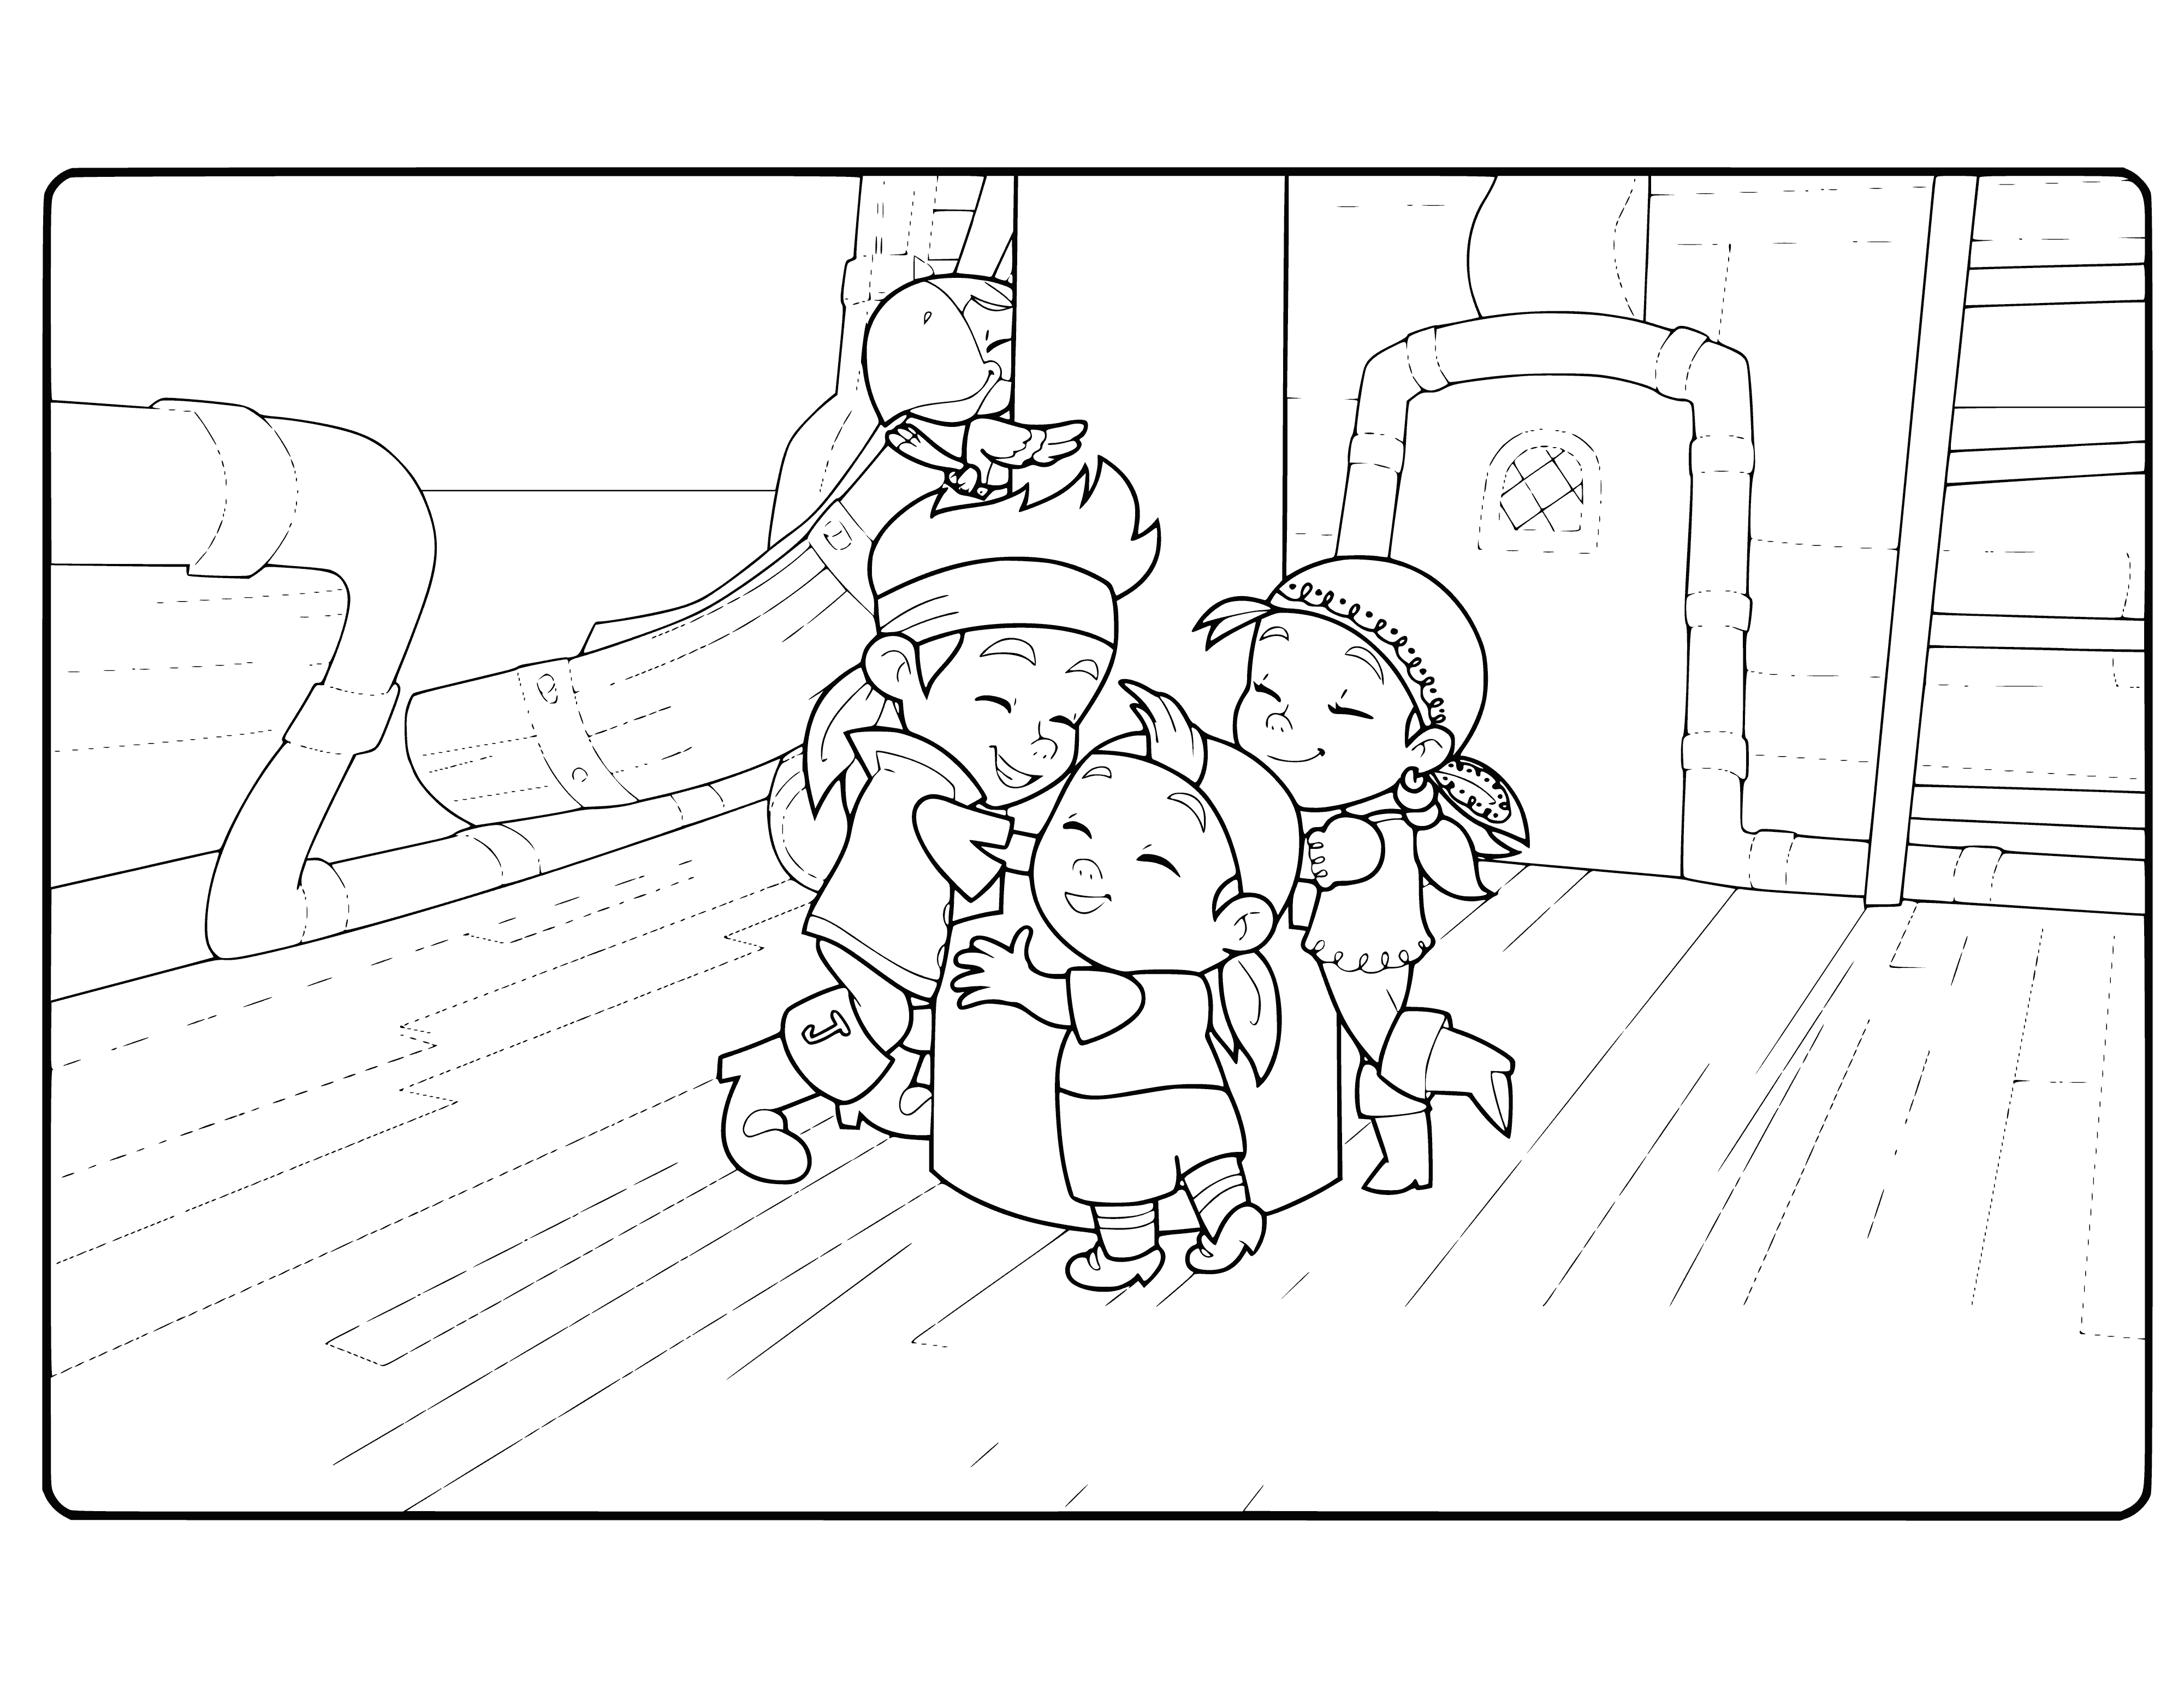 Jake's crew missed their ship coloring page